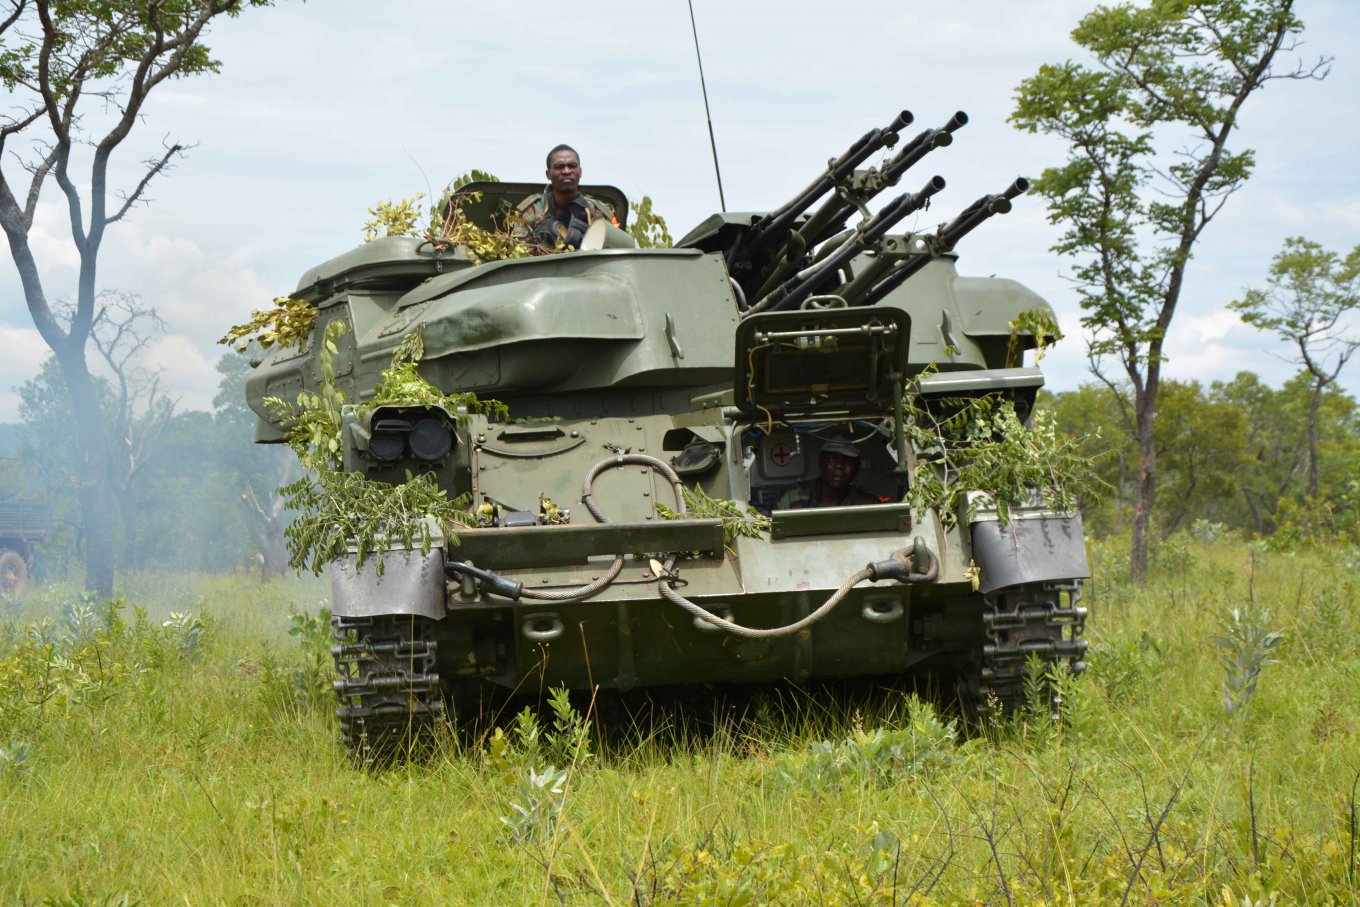 ZSU-23-4 Shilka self-propelled anti-aircraft gun of the armed forces of Angola, Angola Wants to Be the US Ally, Its Excess Soviet Weapons Can Help the Armed Forces of Ukraine, Defense Express